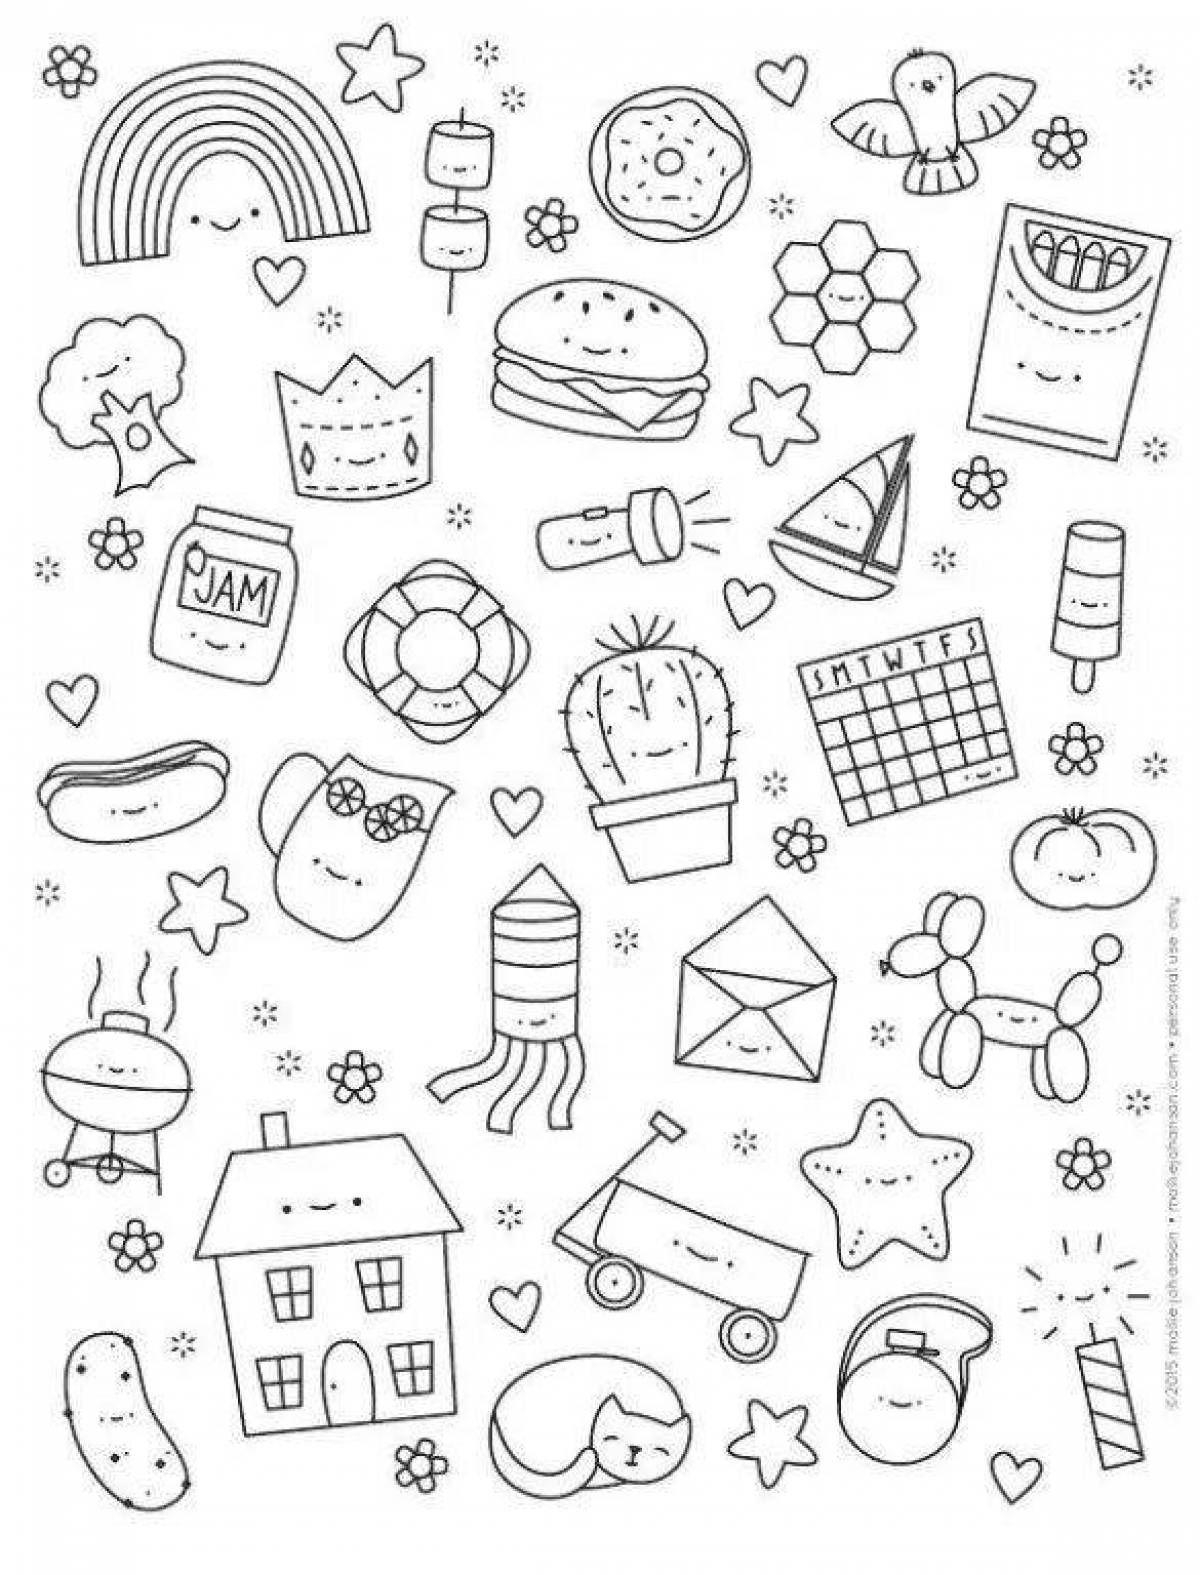 Great coloring pages, small stickers